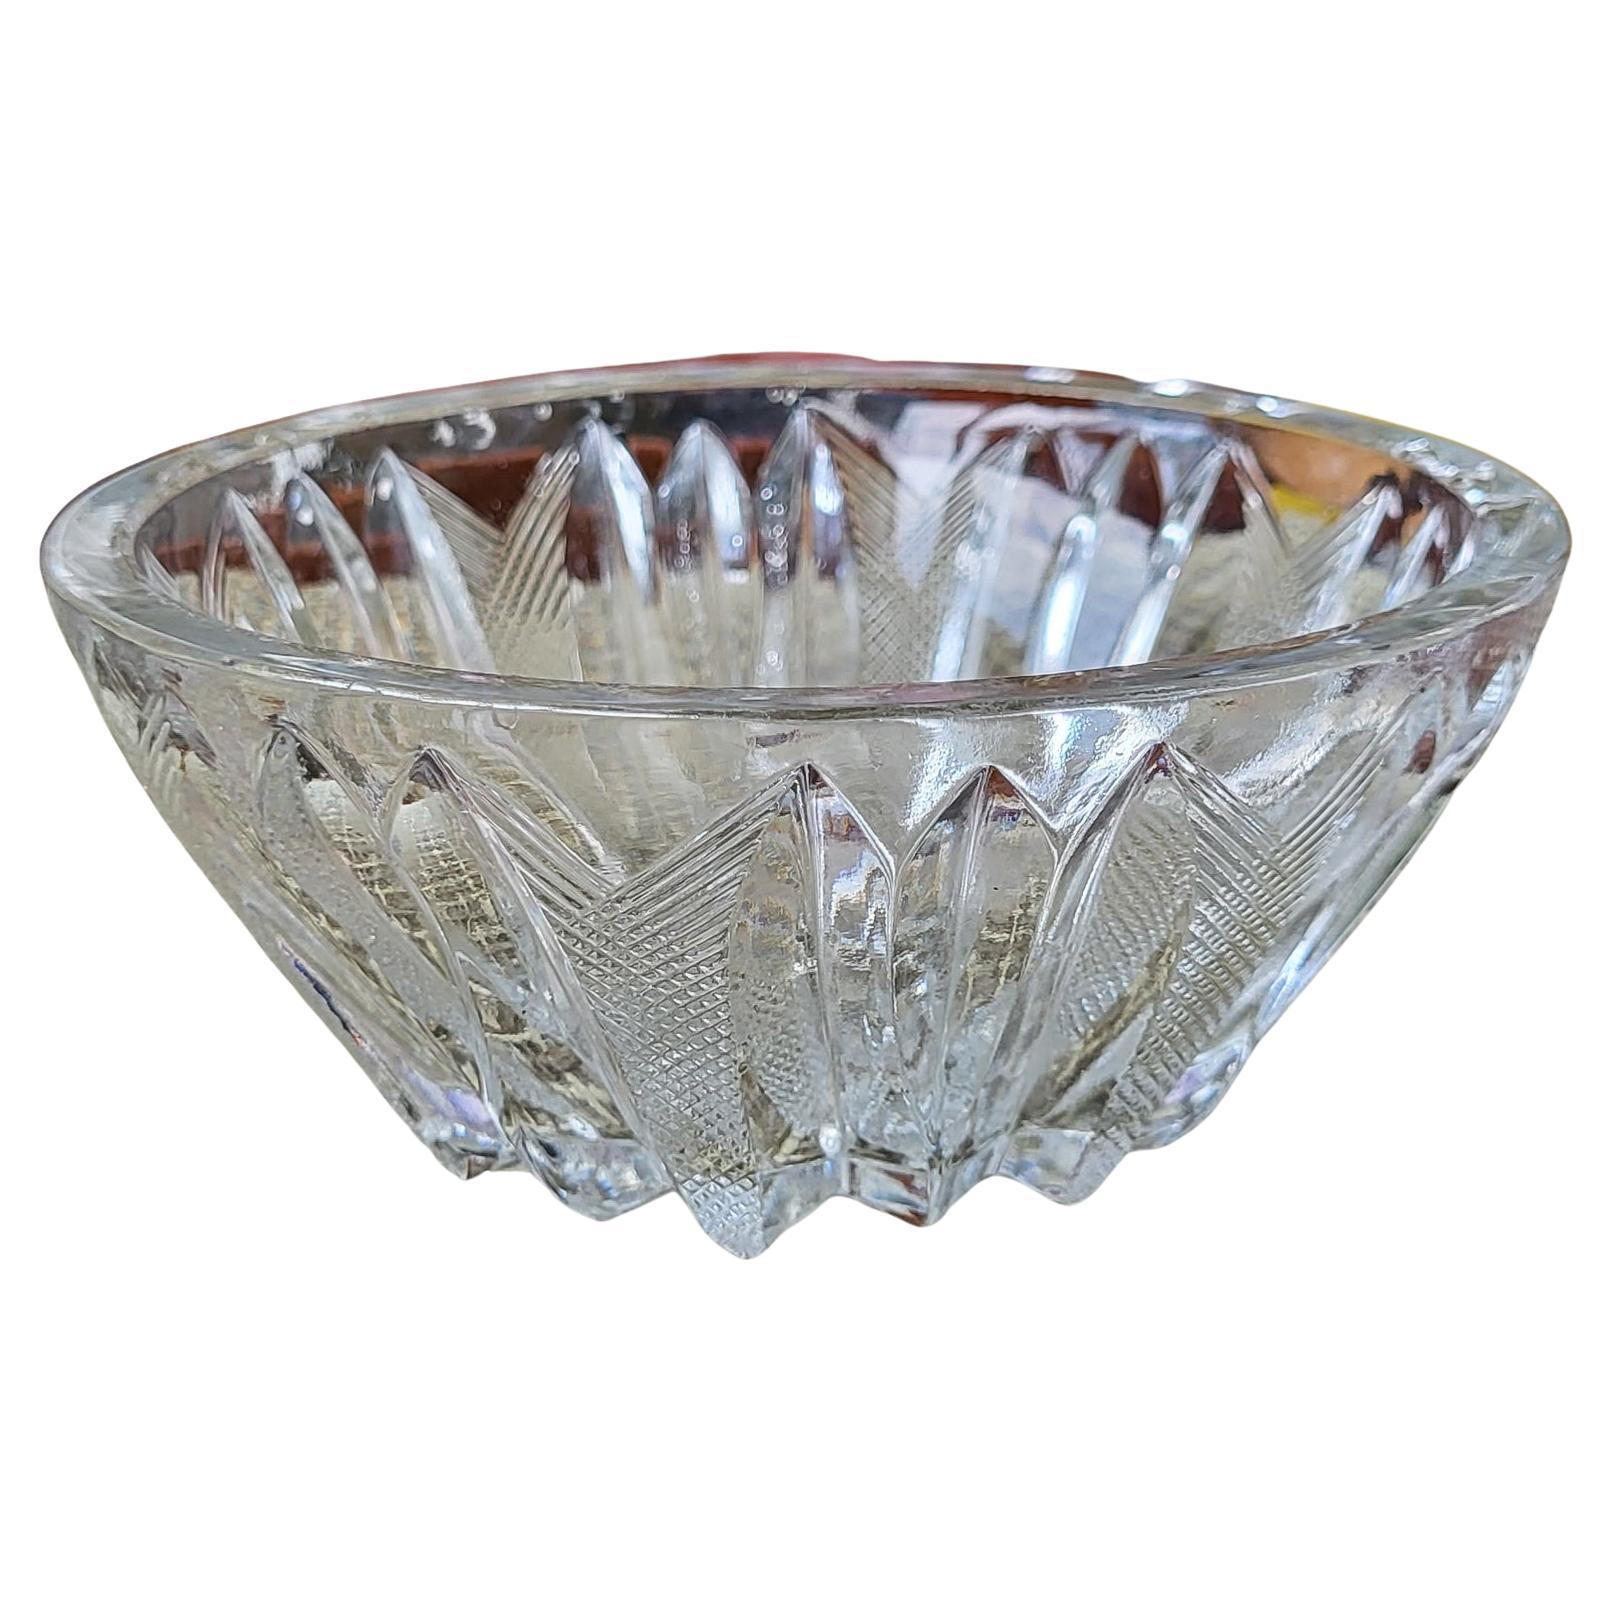 Elegant Vintage Glass Candle Vase: a Timeless Treasure from the Ussr 1960s 1J36 For Sale